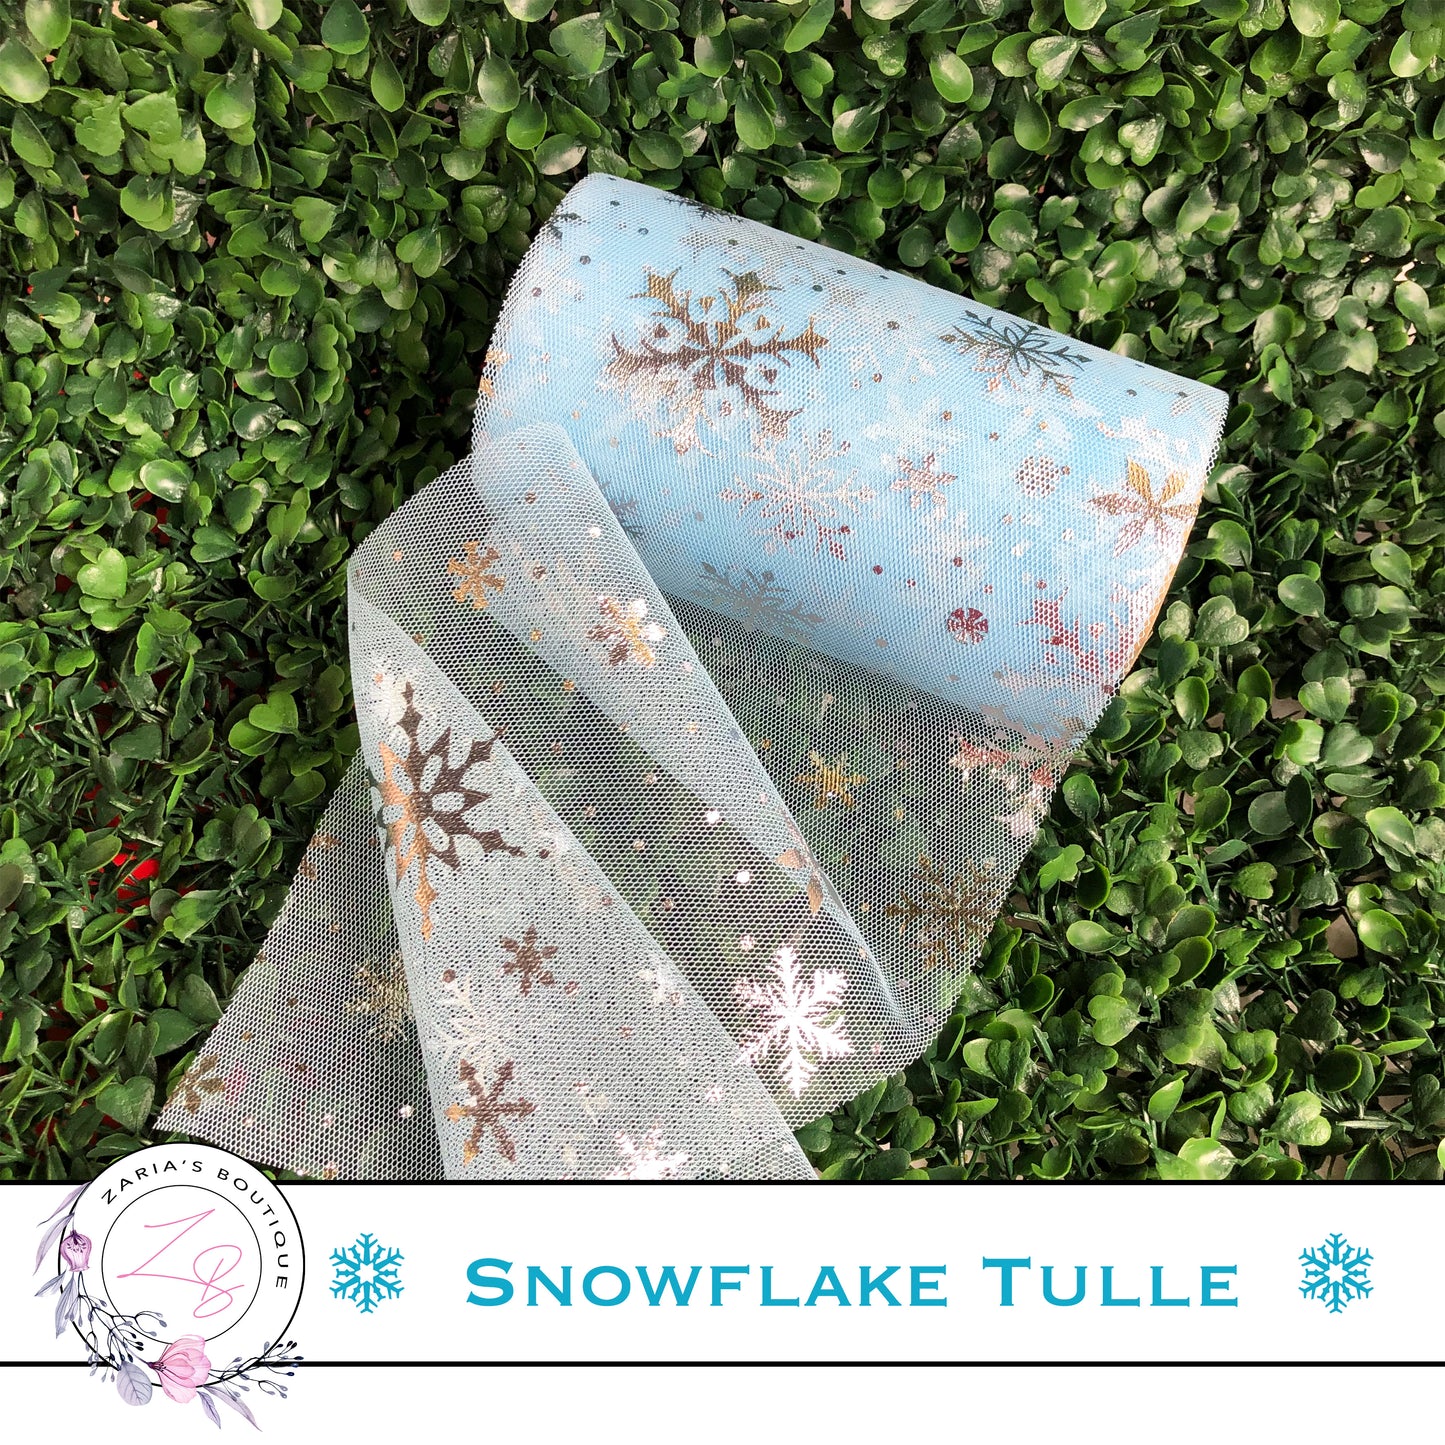 ⋅ Snowflake Tulle ⋅ Blue & Silver Embossed Tulle Fabric ⋅